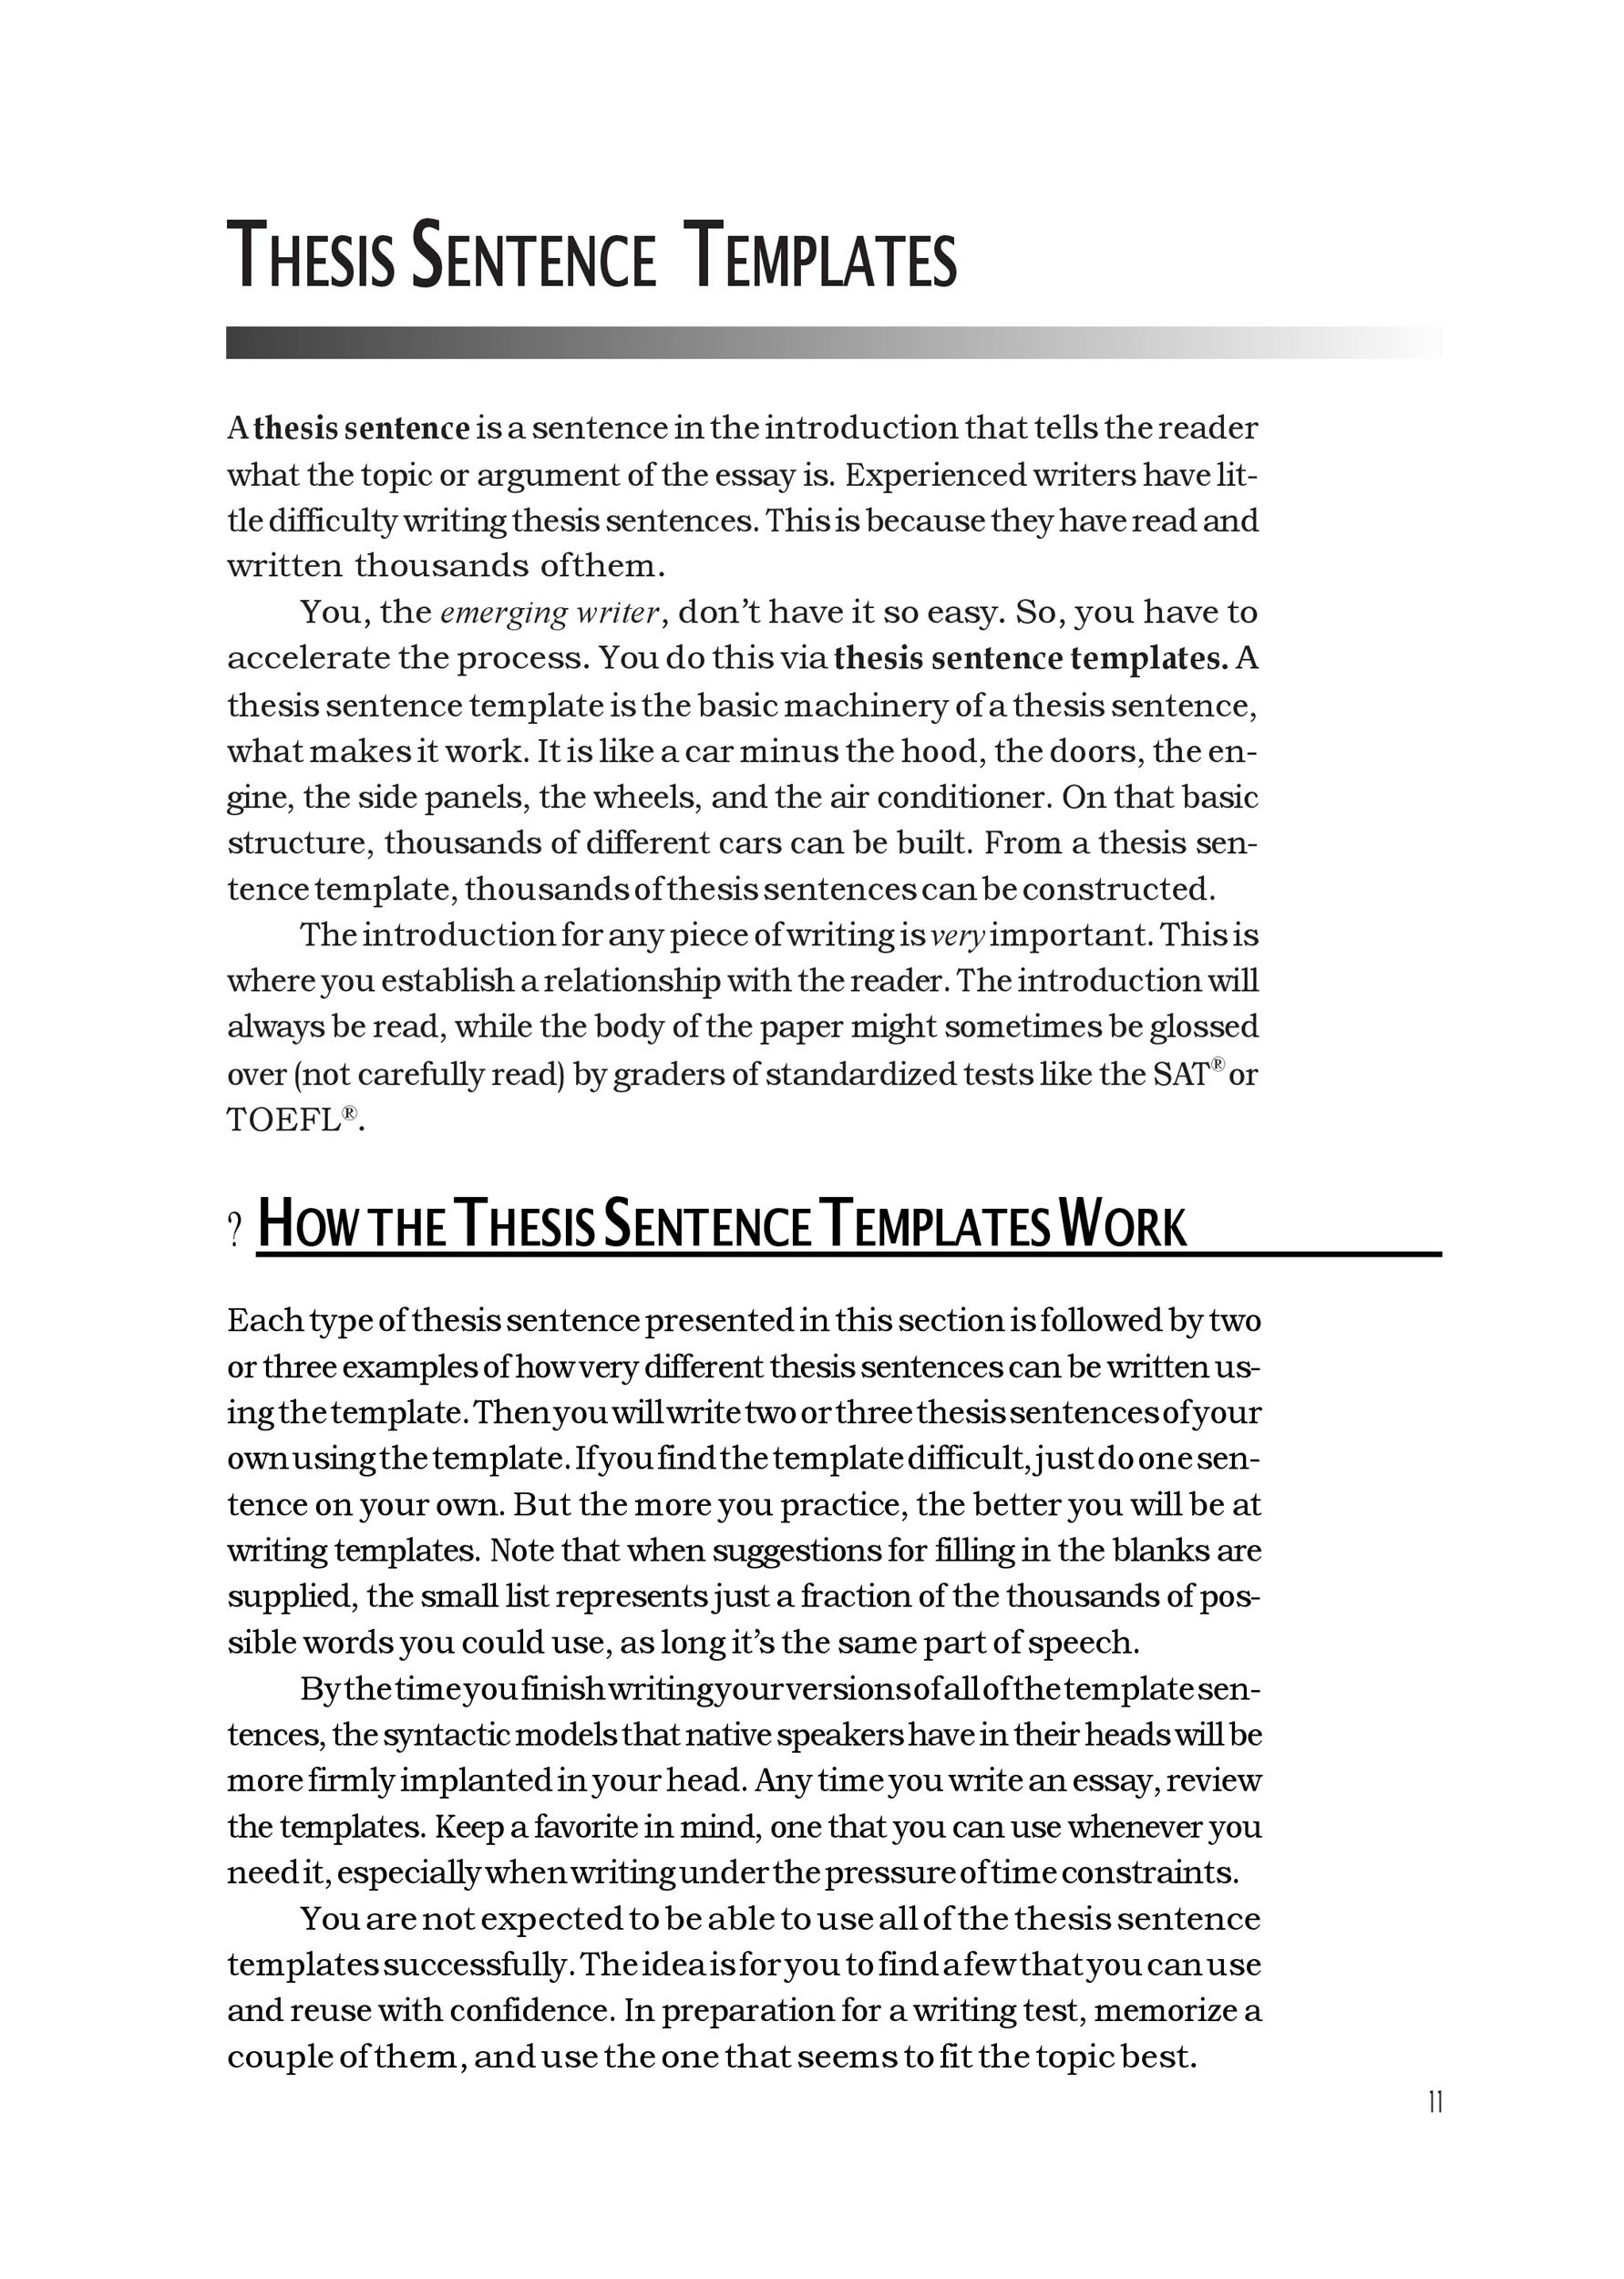 Free thesis statement template 01